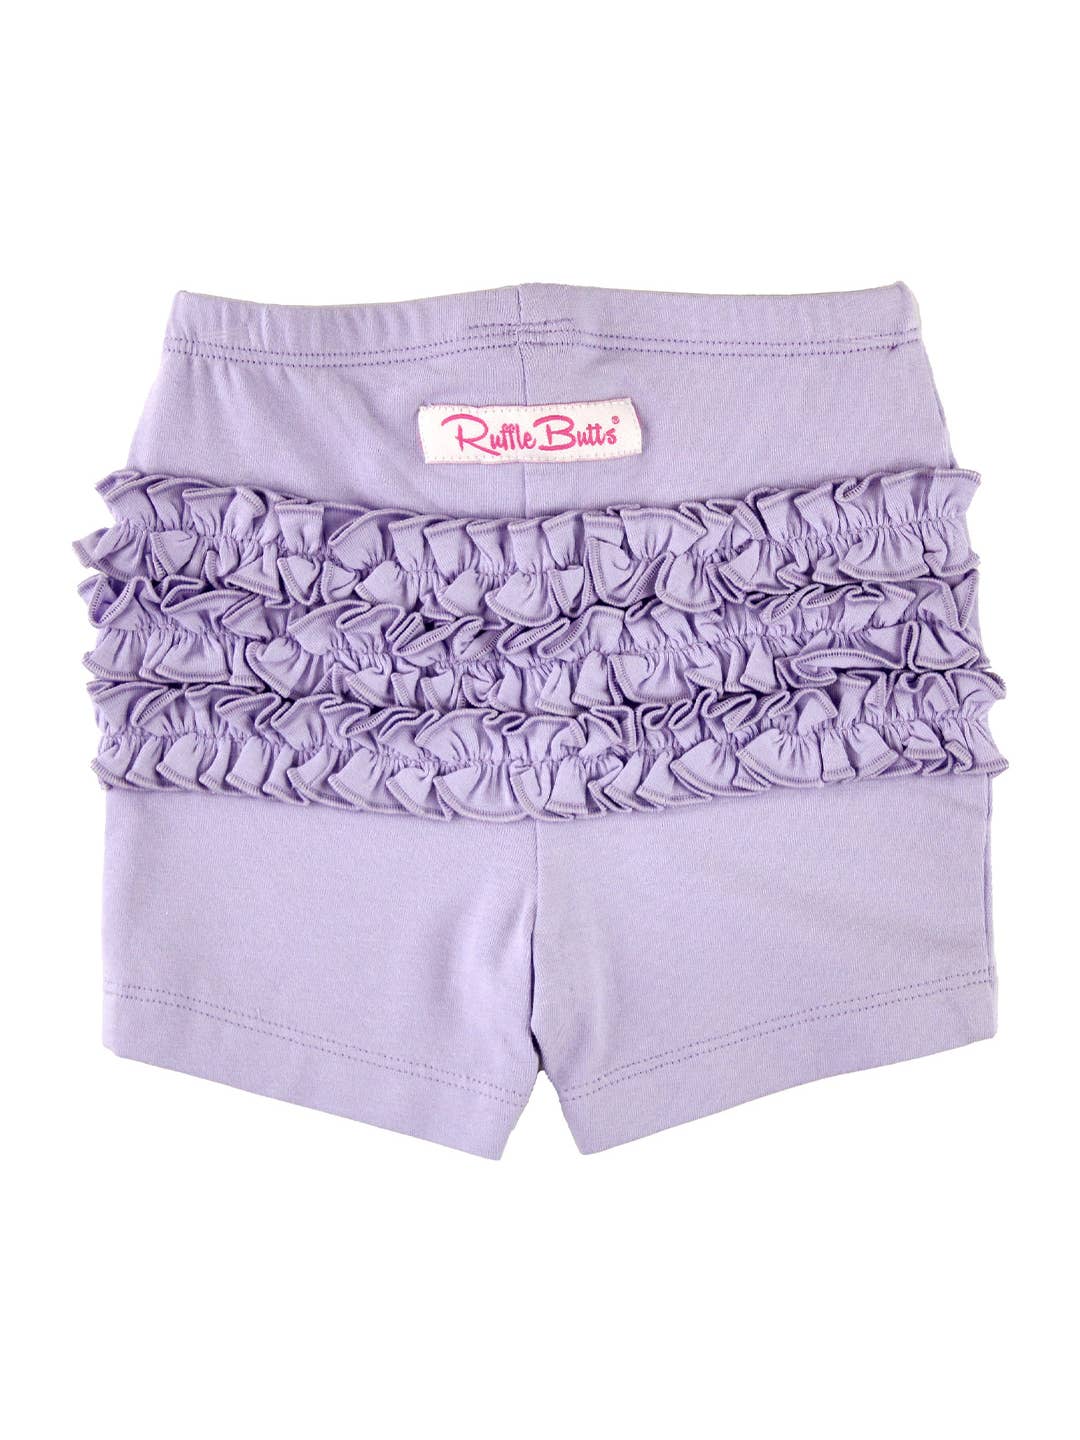 Ruffle Butts-Lavender Playground Shorts